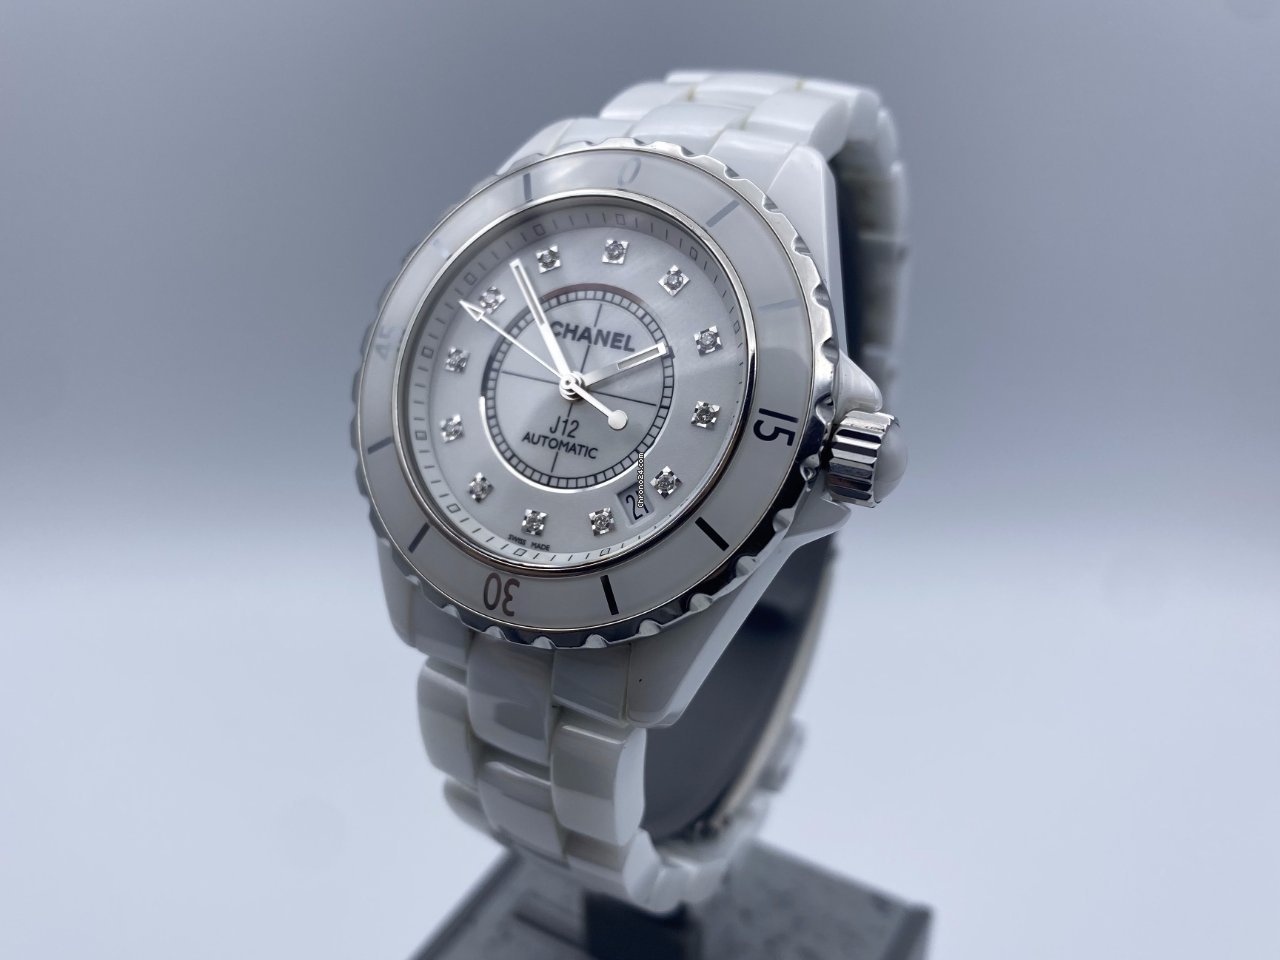 Chanel J12 Automatic 38mm h1629